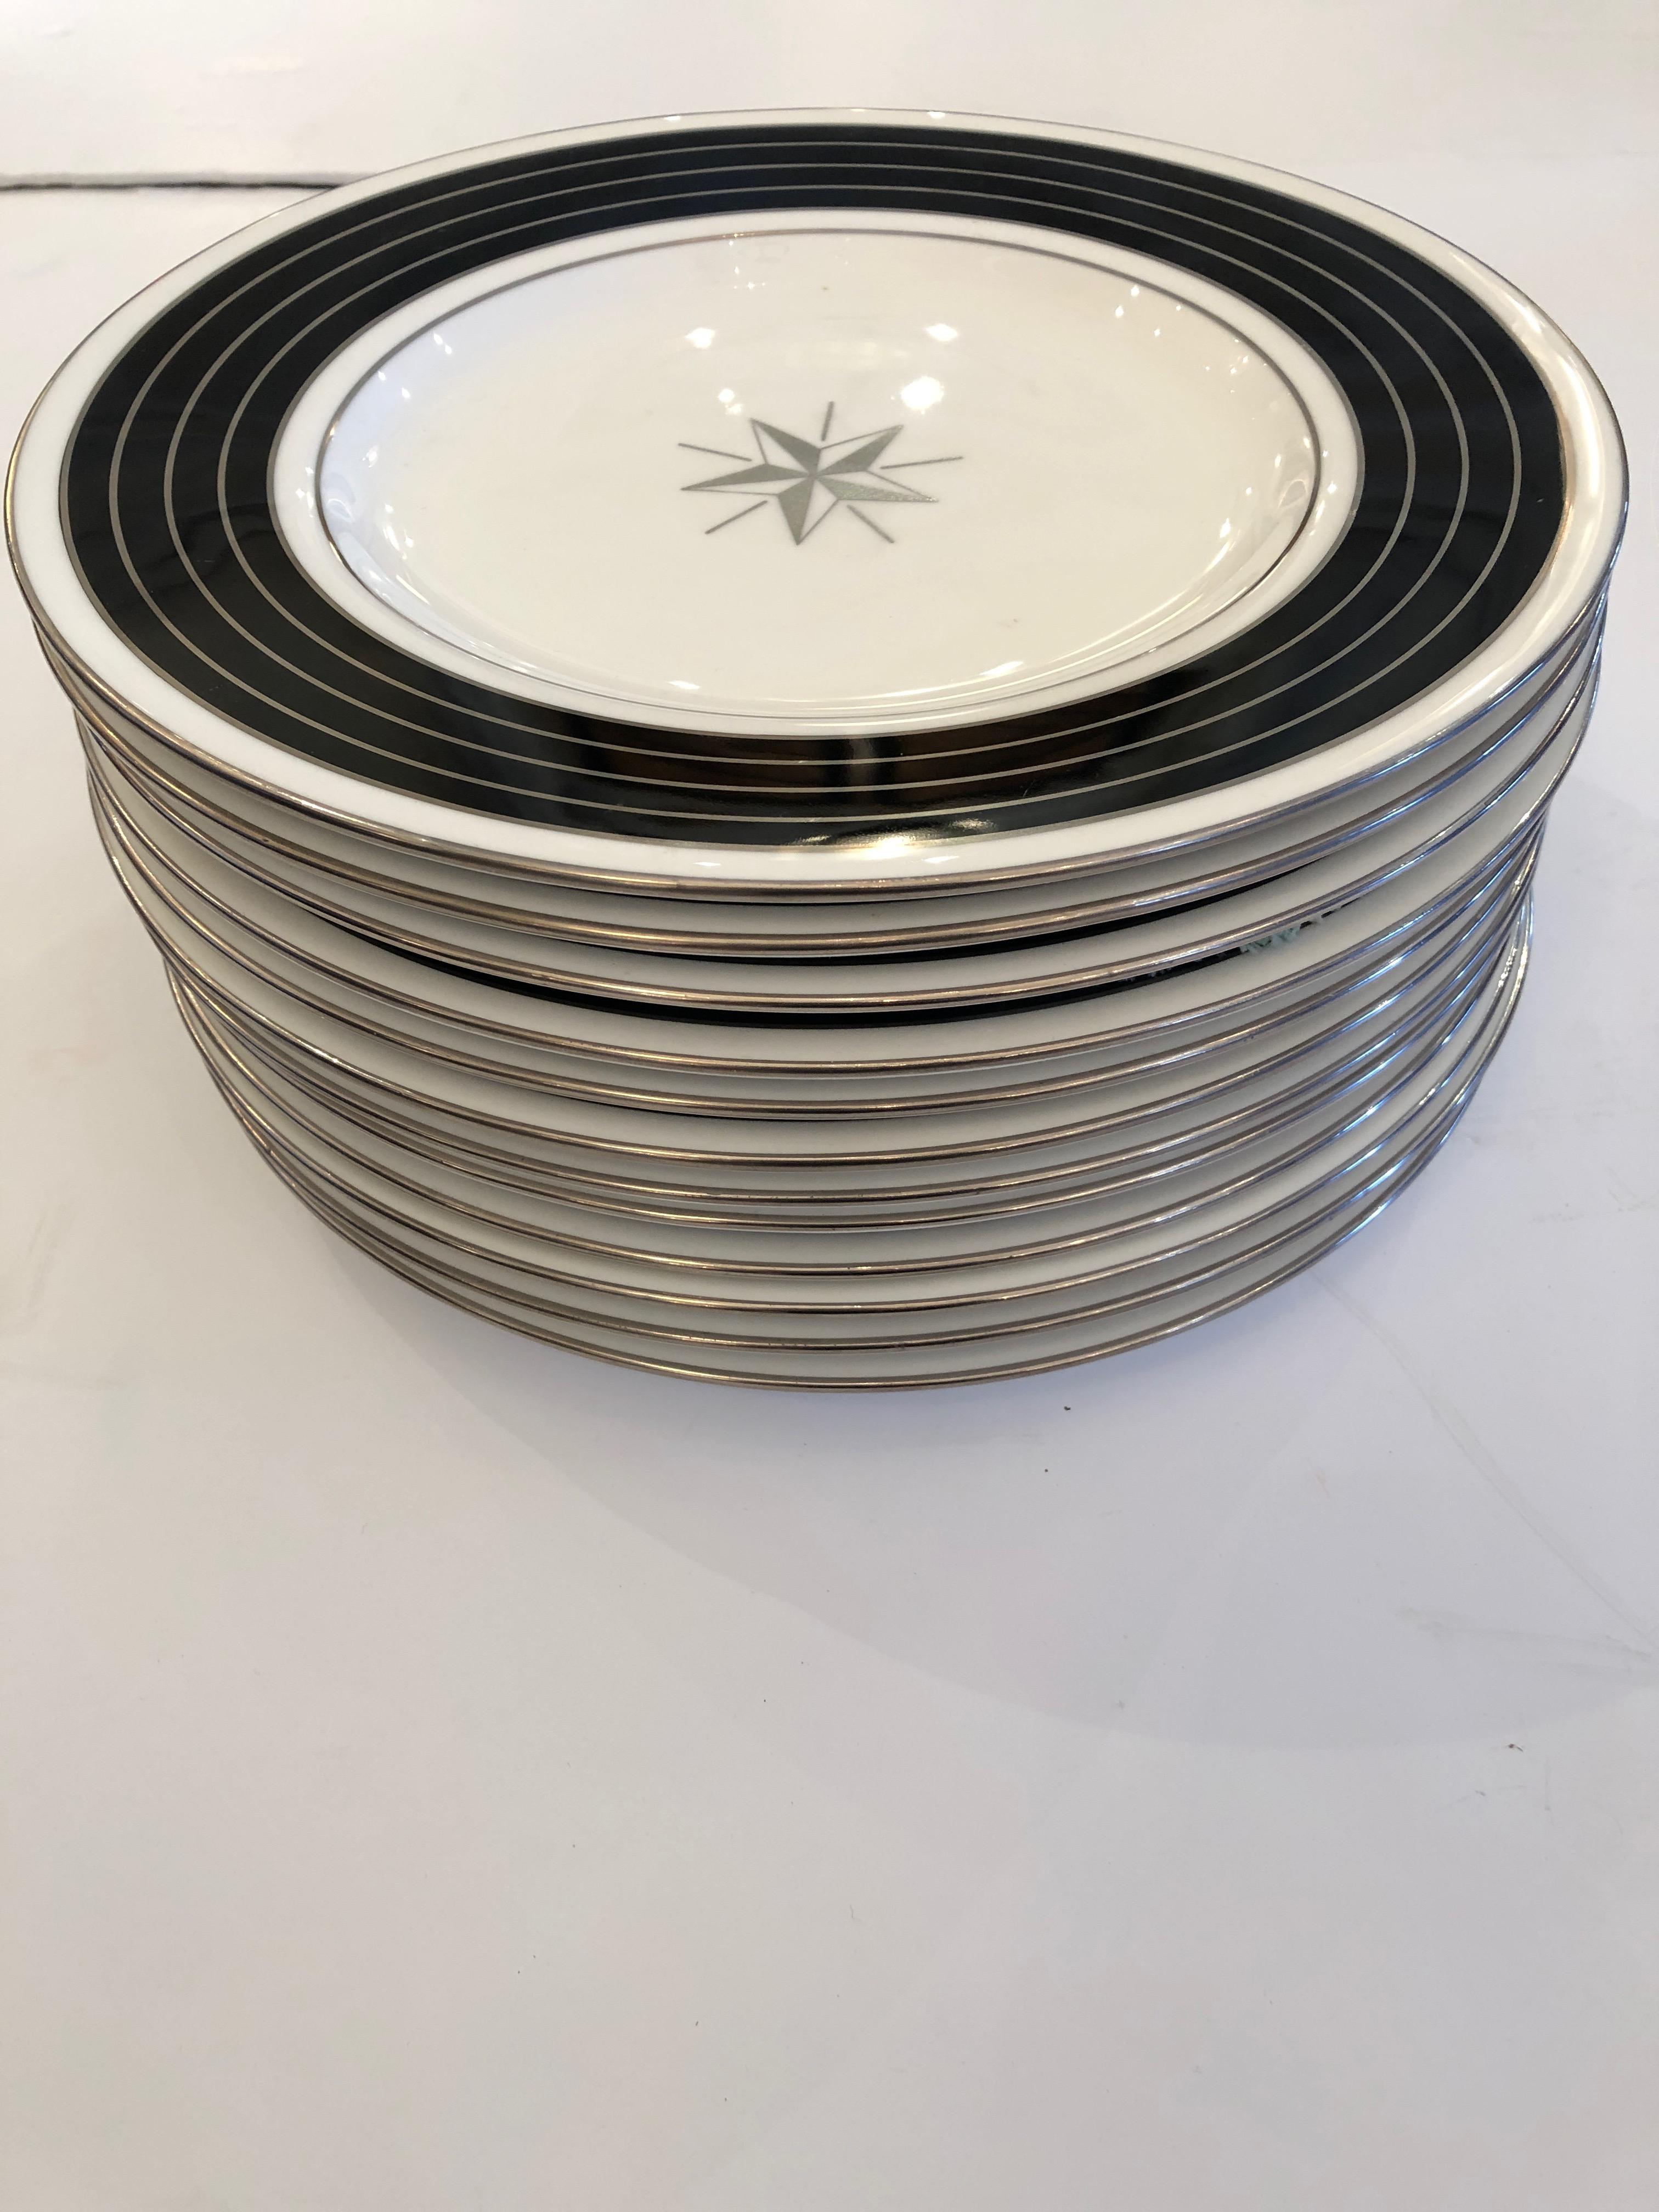 English Sublime Set of 12 Minton Dinner or Service Plates For Sale